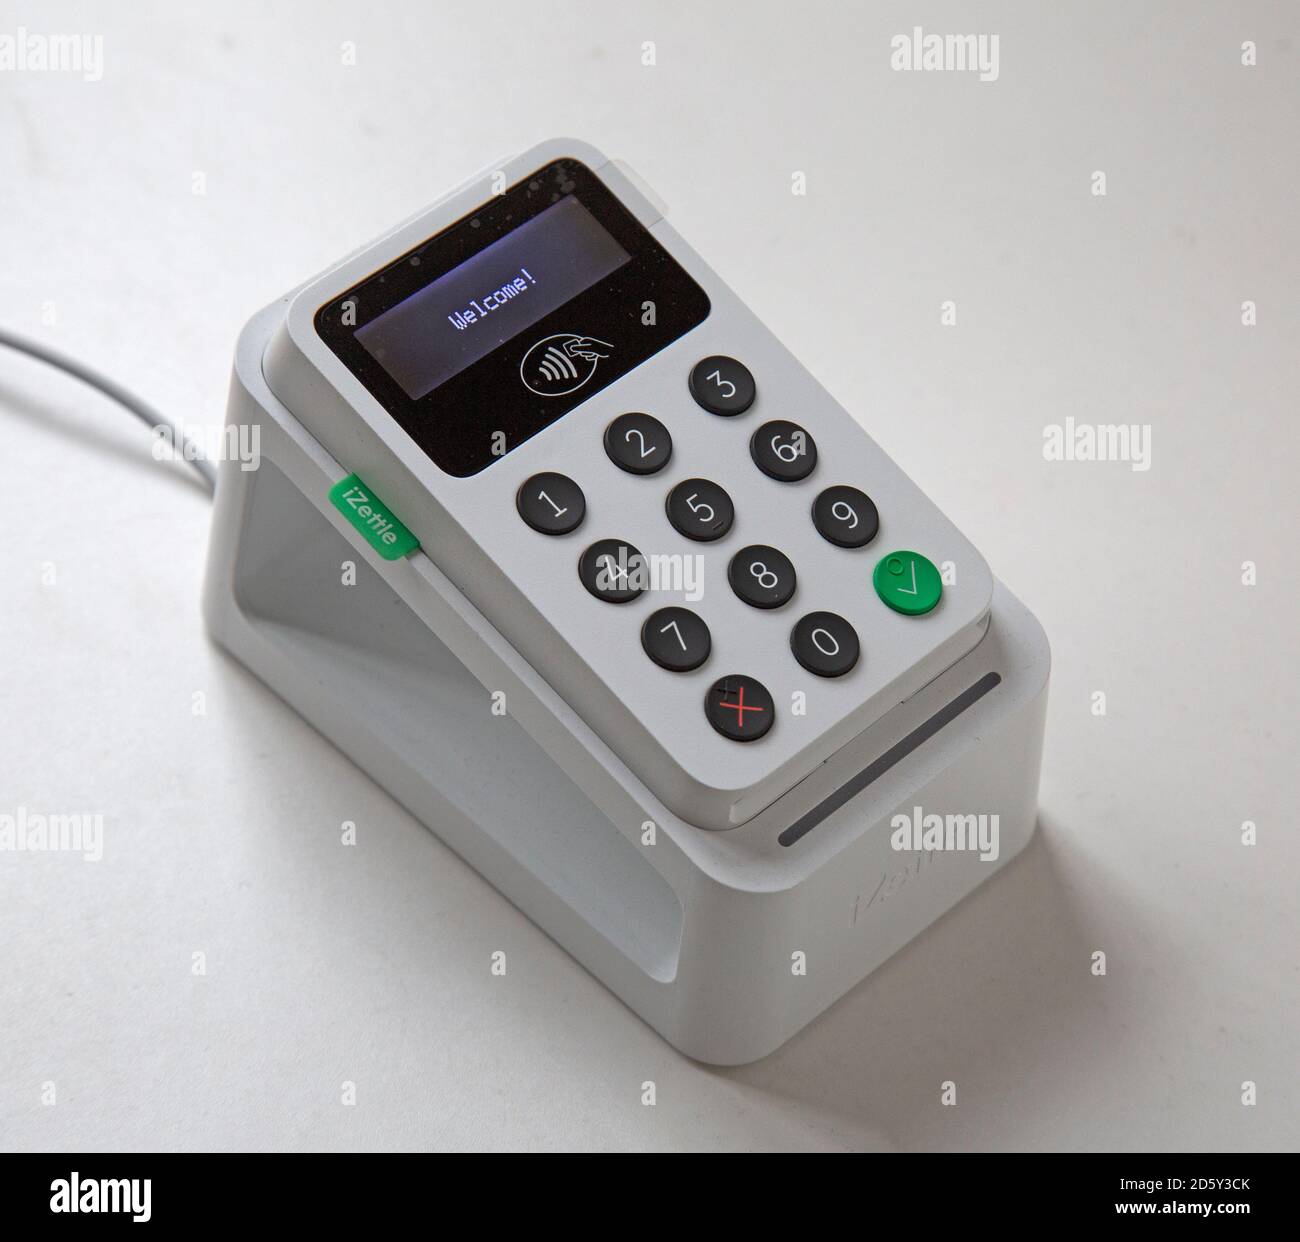 An izettle debit and credit card reader in a docking and charging pod or station. Stock Photo